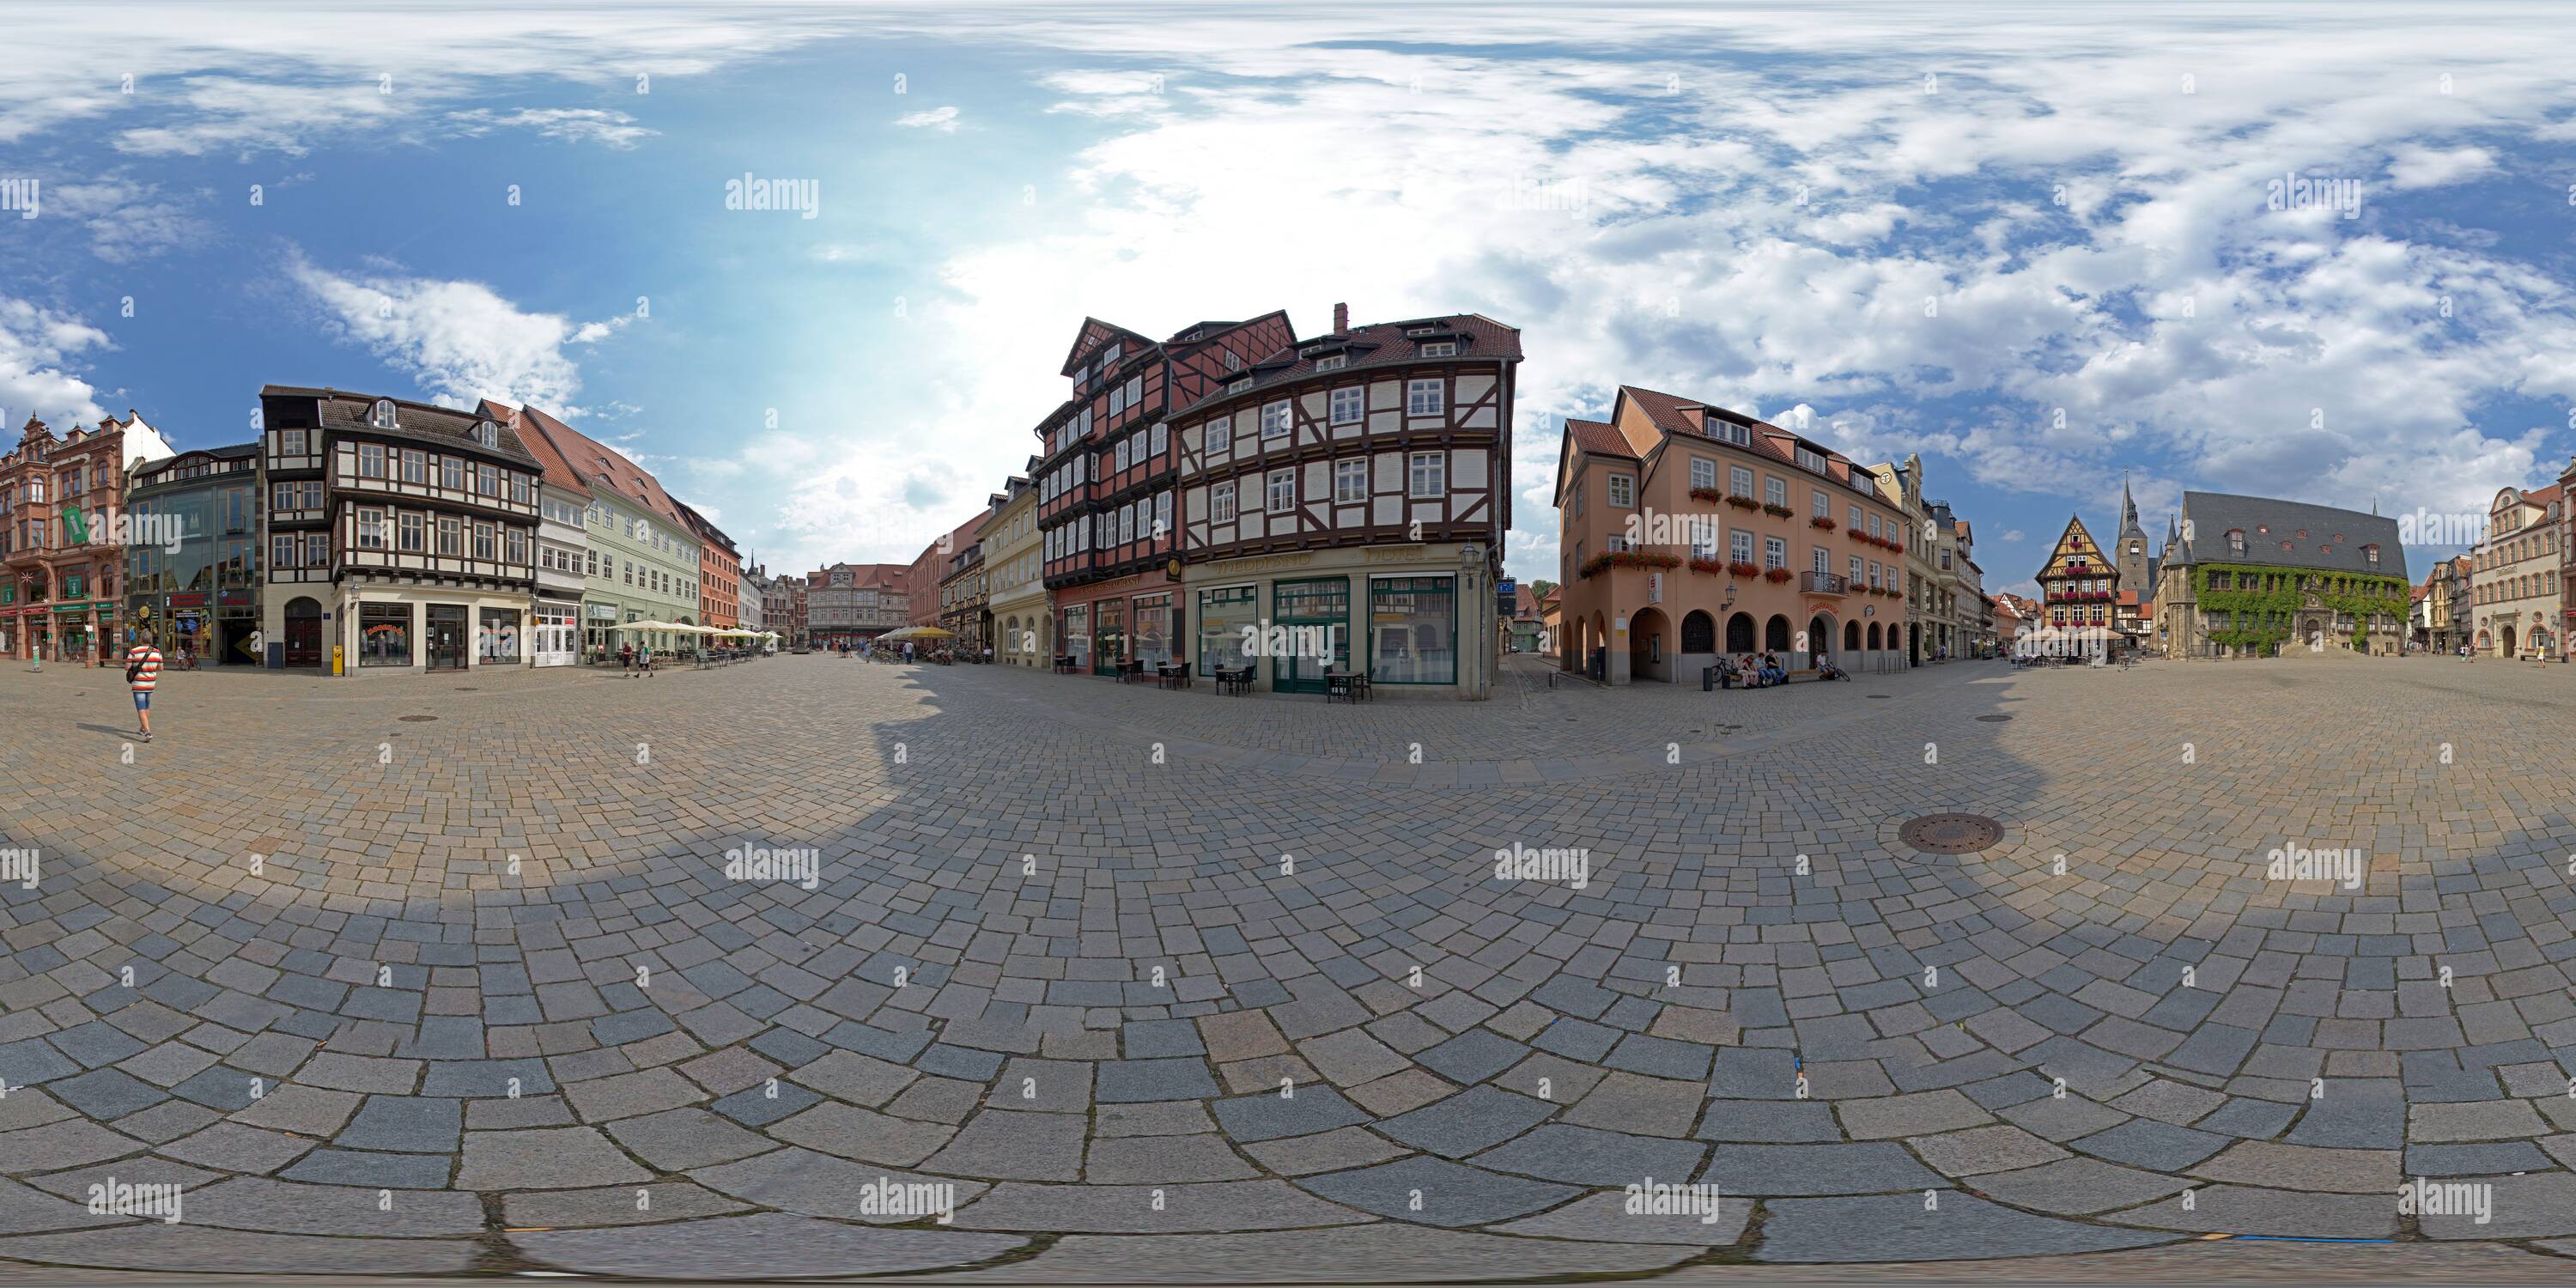 360 degree panoramic view of 360 degree photo, market square, UNESCO world cultural heritage, Quedlinburg, Saxony-Anhalt, Germany